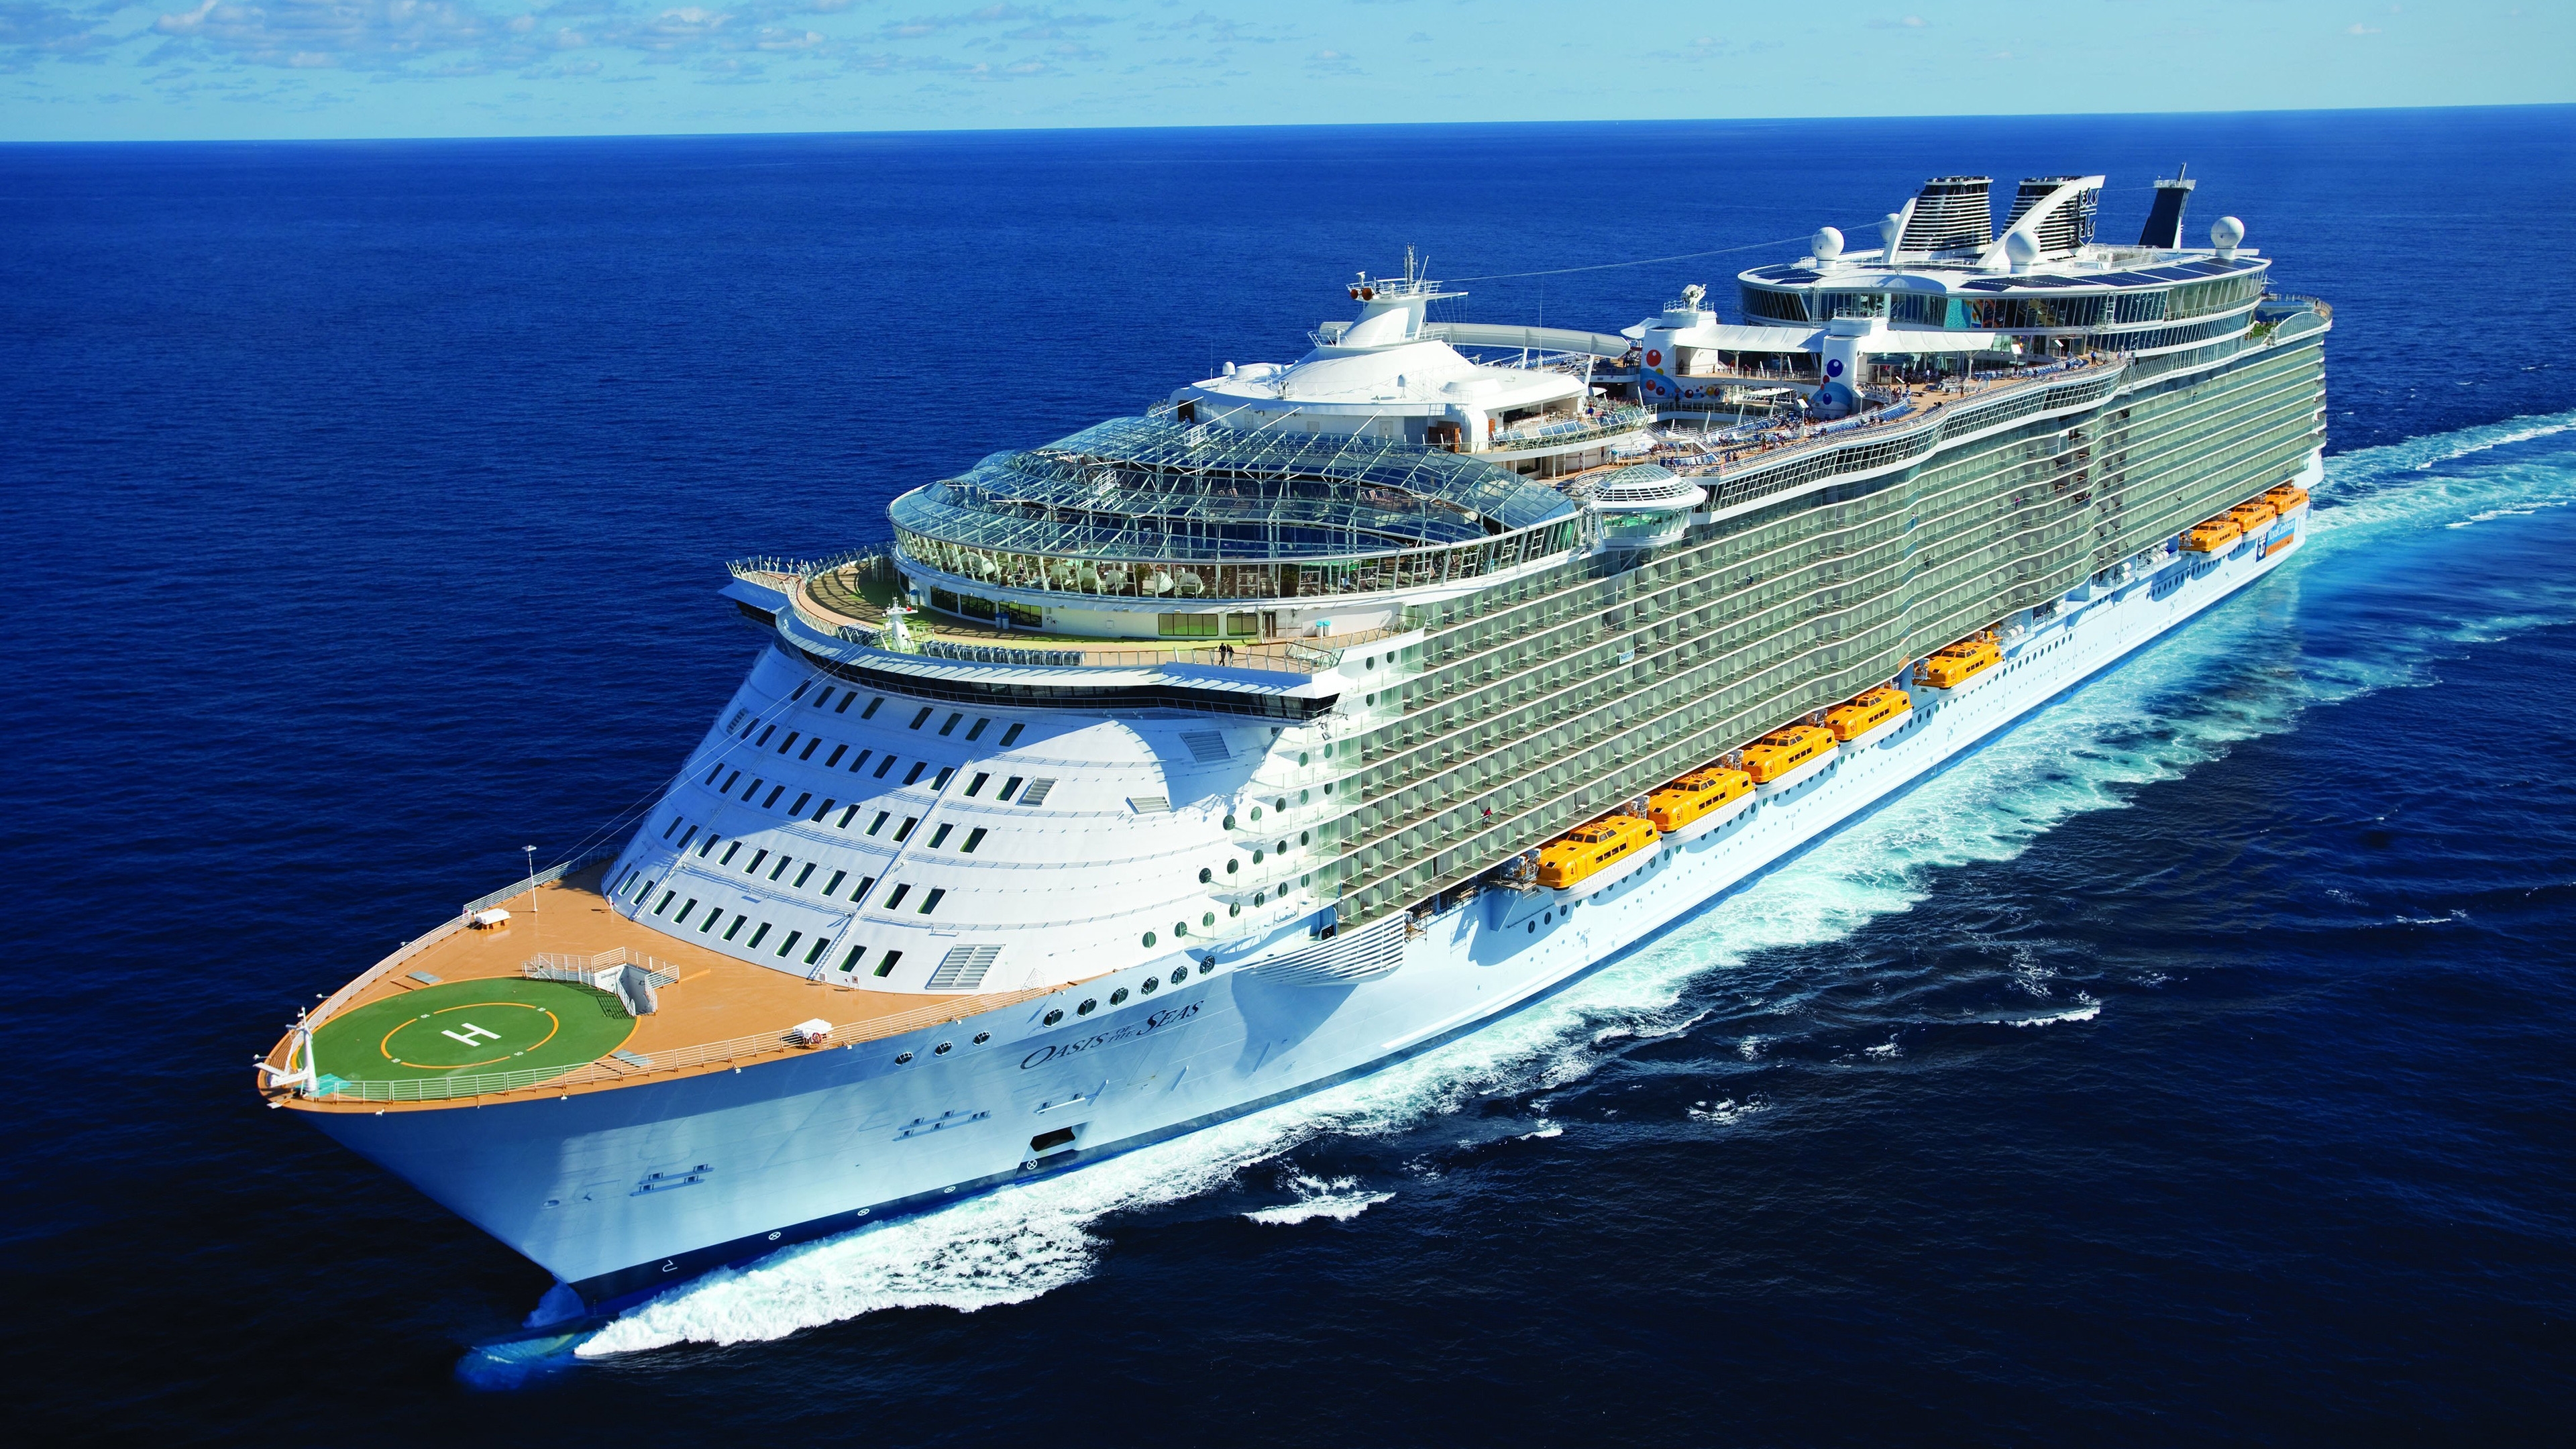 Oasis of the Seas for 3840 x 2160 Ultra HD resolution